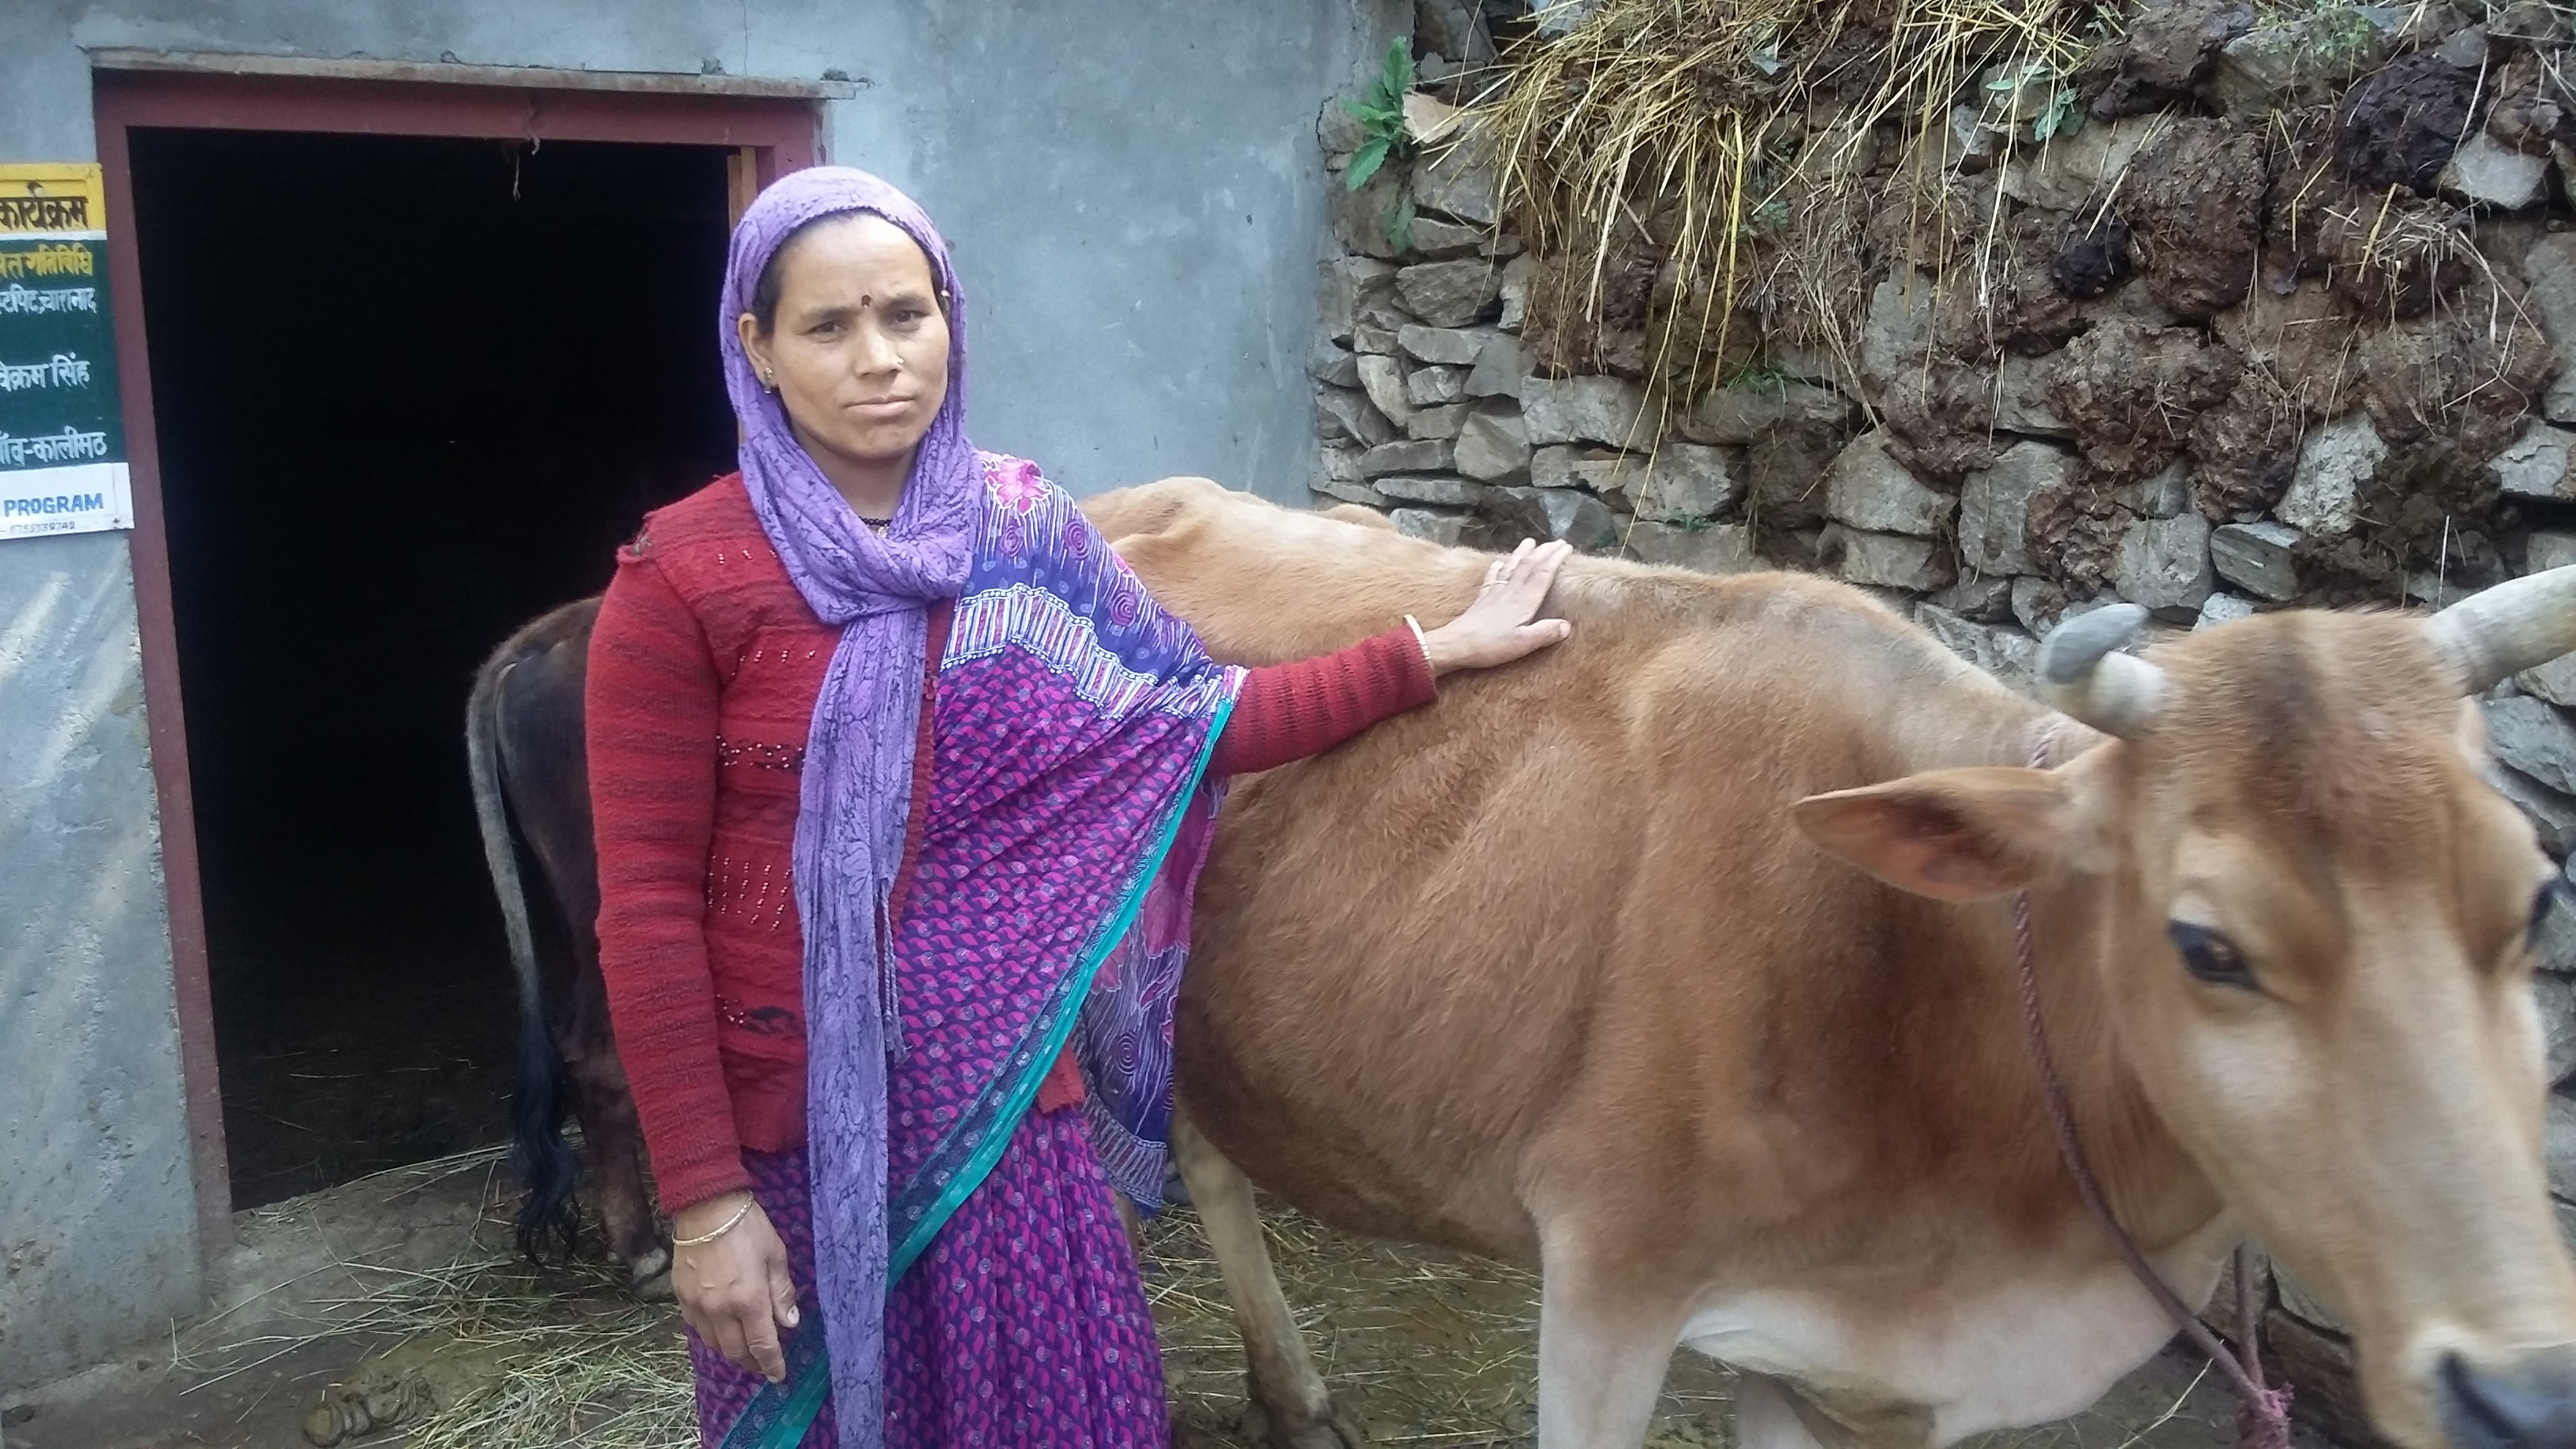 For Vimla Devi, 30, of Kalimath village, who lost her shop and home in the 2013 disaster, her cow has saved her from abject poverty. (Credit: Nitin Jugran Bahuguna\WFS)